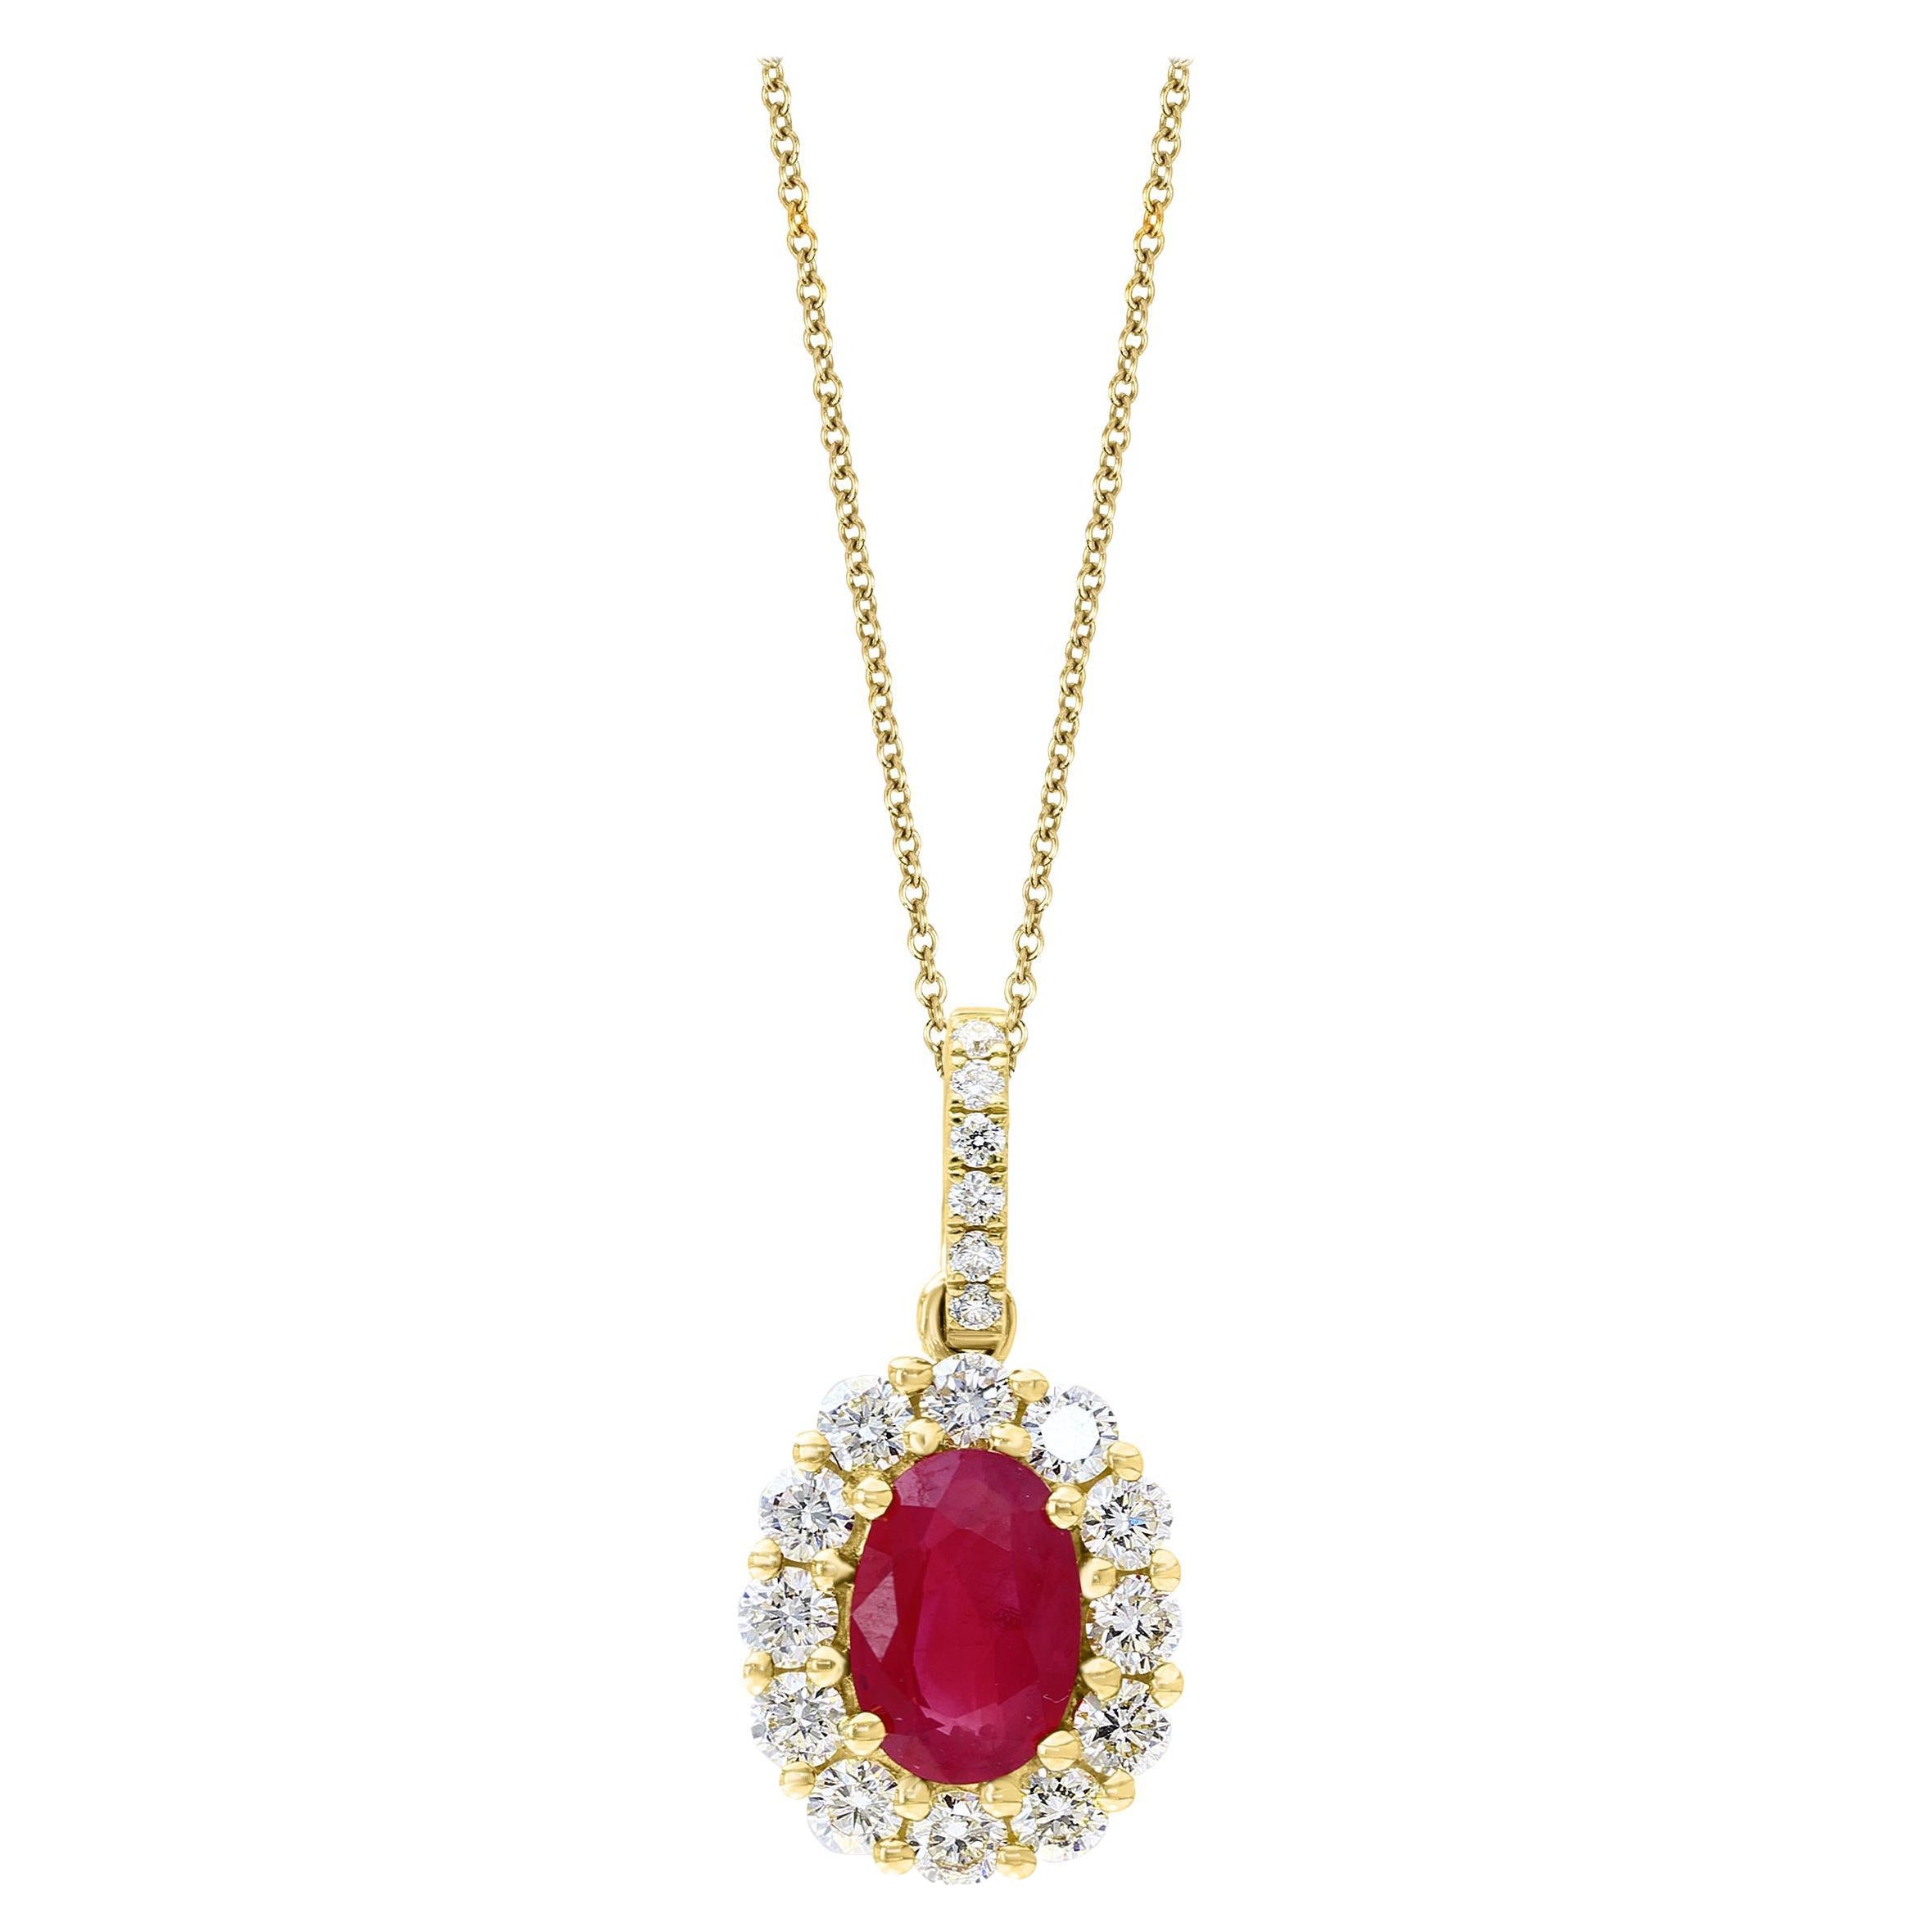 1.00 Carat Oval Cut Ruby and Diamond Halo Pendant Necklace in 18K Yellow Gold